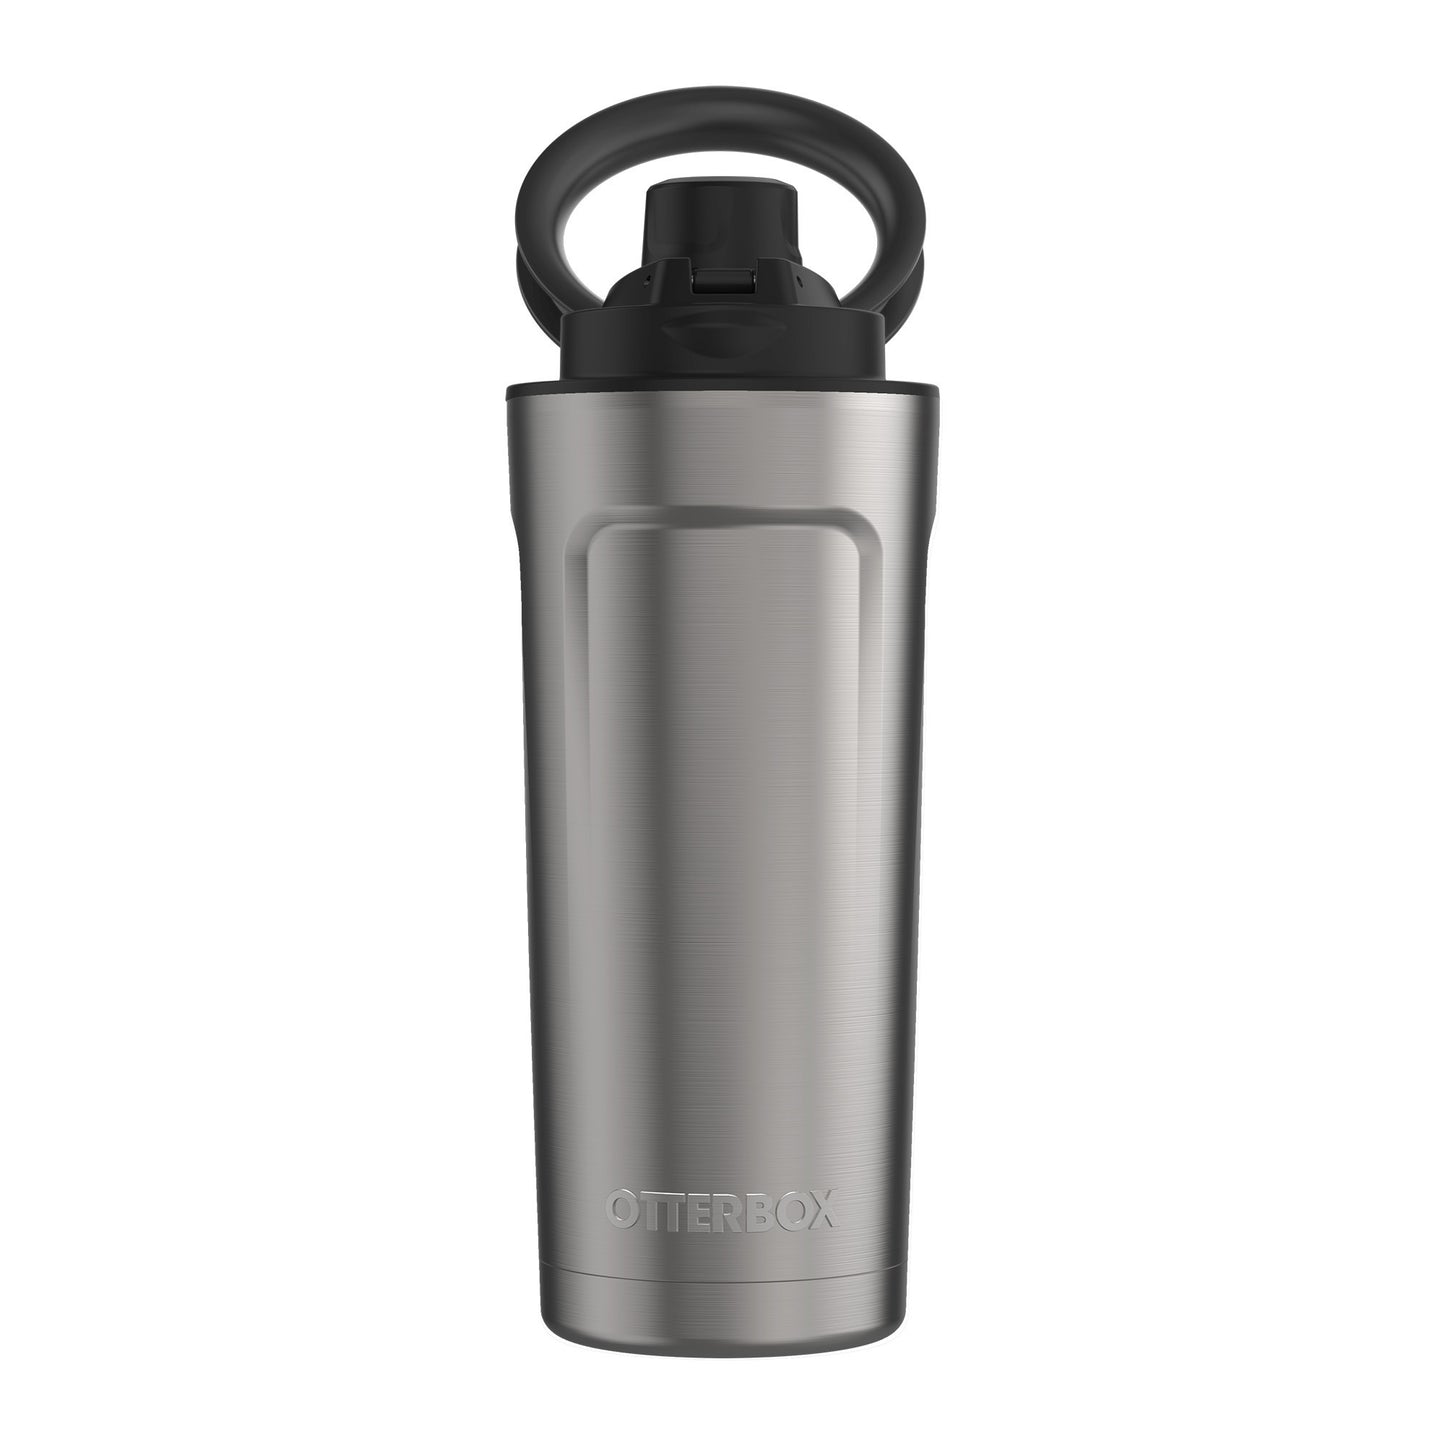 Otterbox 20oz Stainless Steel Elevation Tumbler w/Hydra Lid - 15-08823